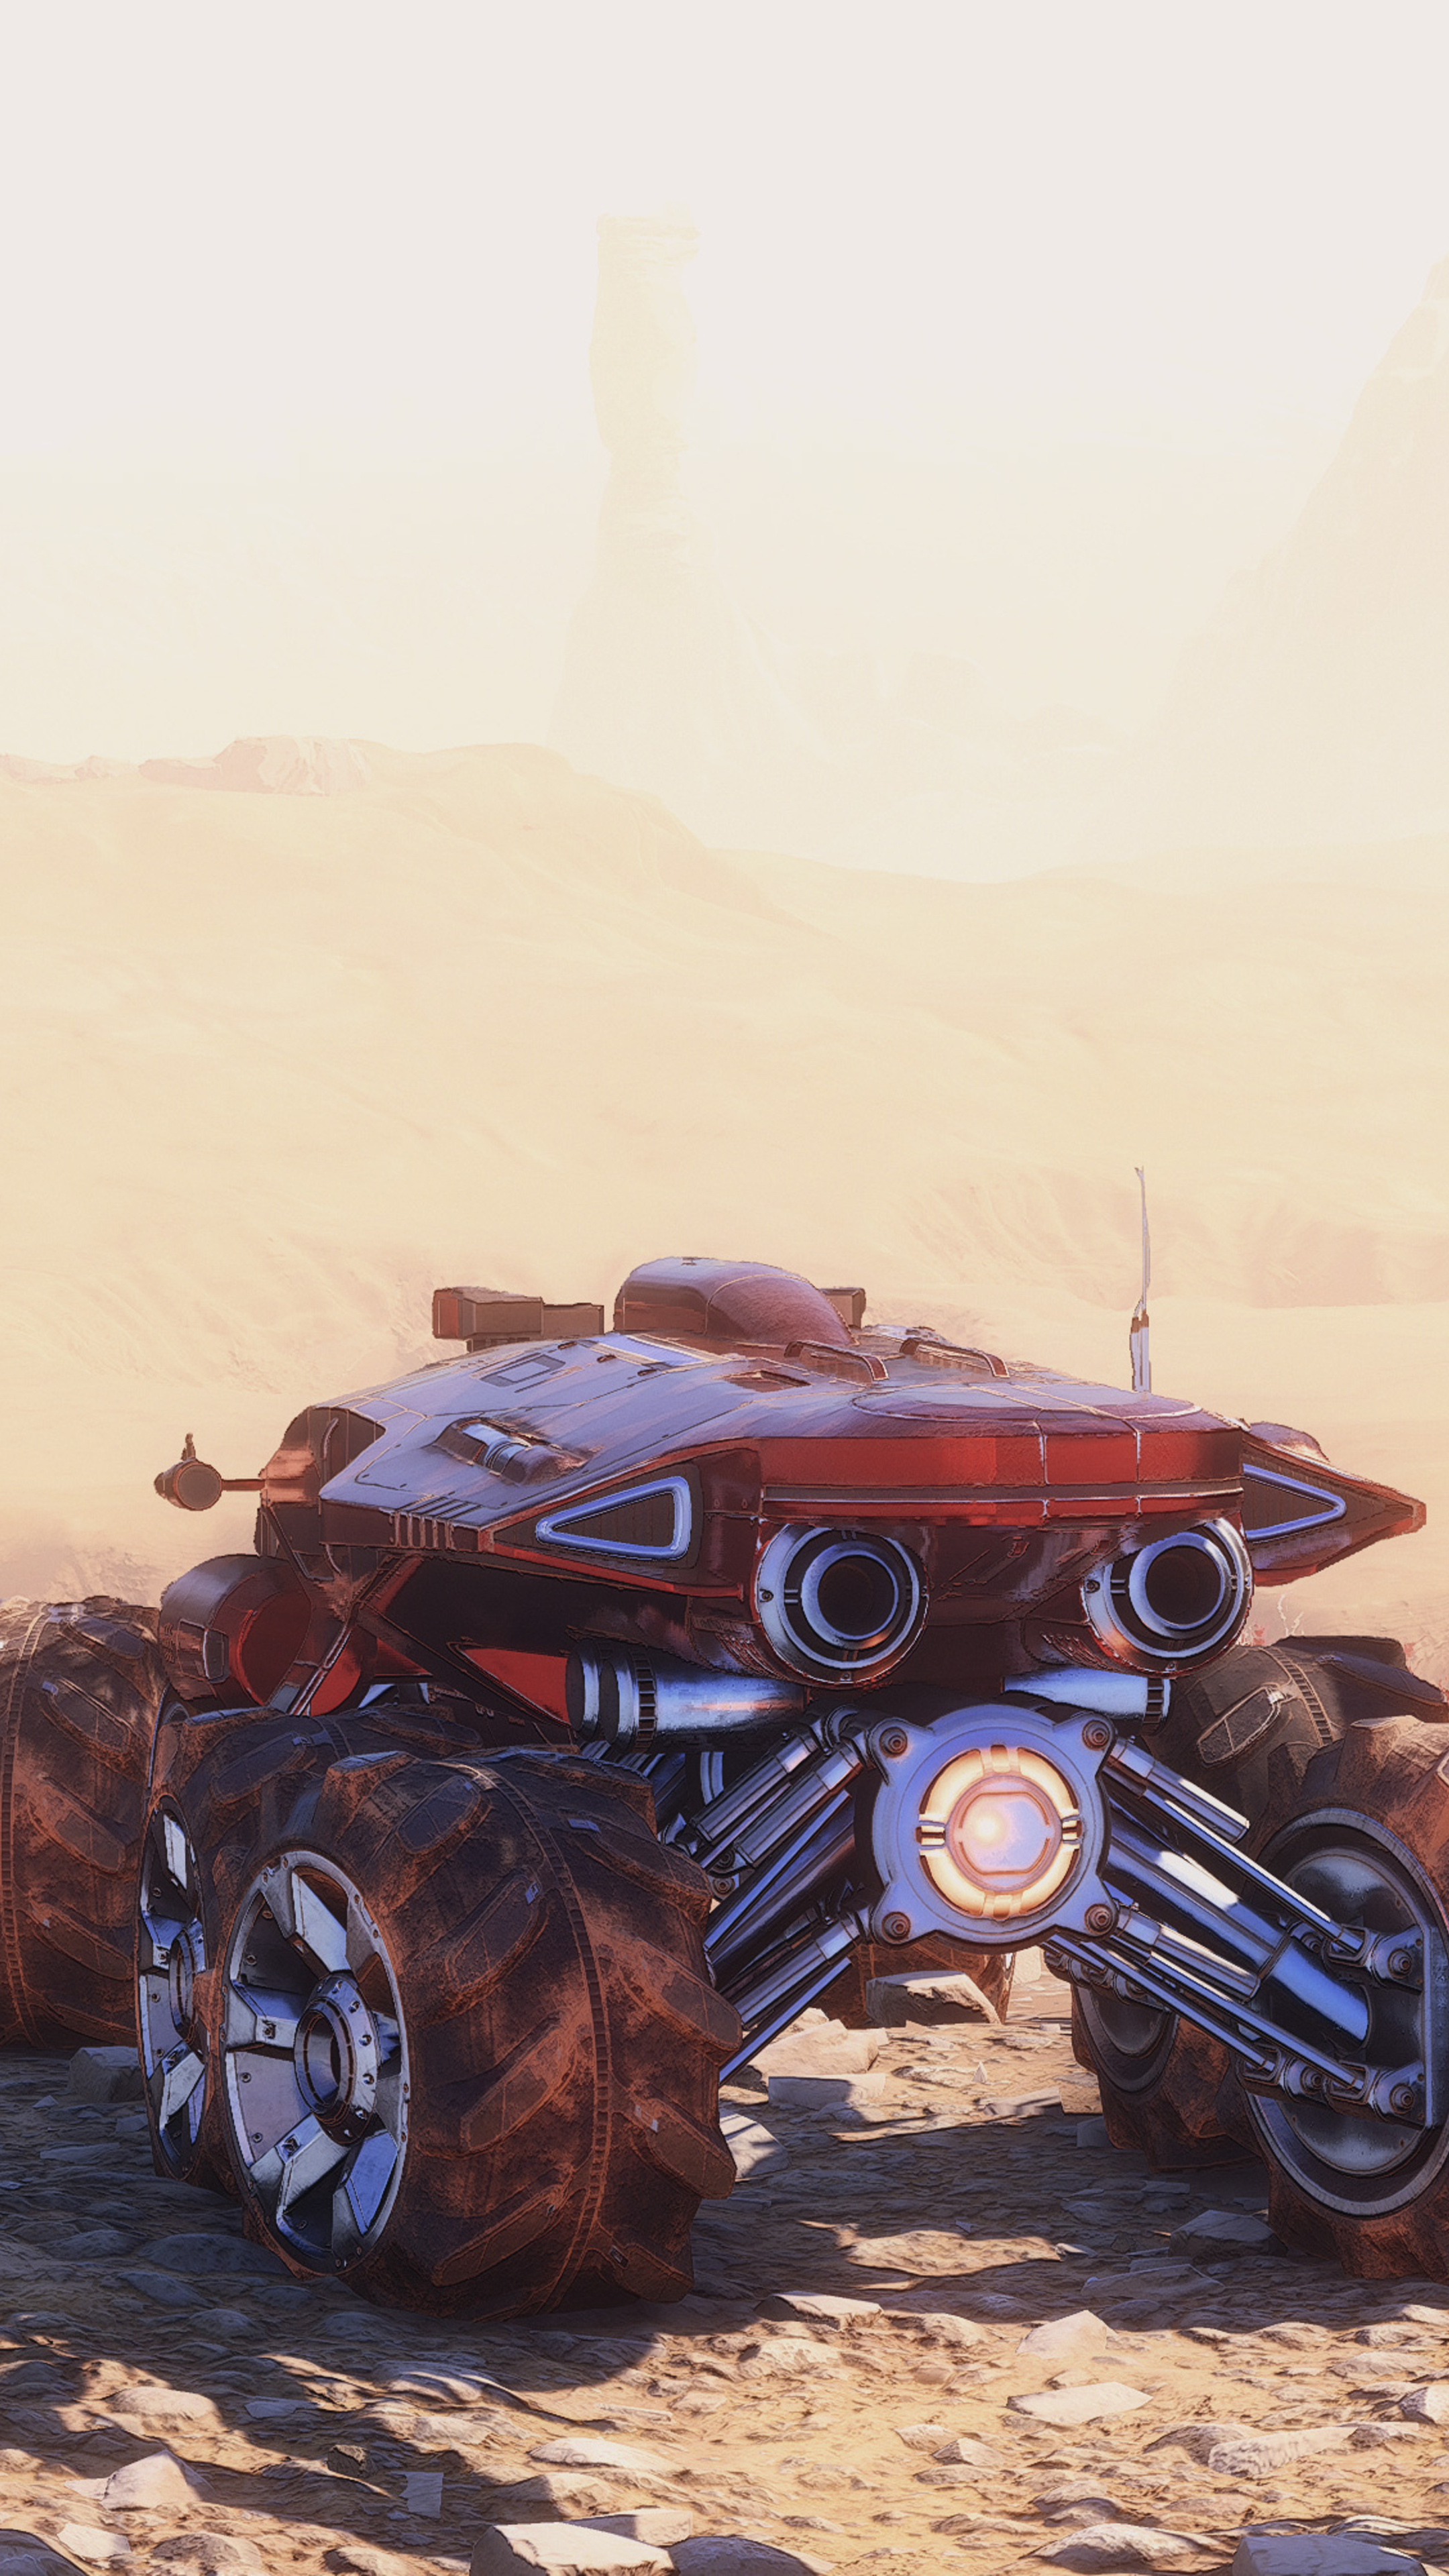 Mass Effect: Andromeda vehicles, Sony Xperia X, HD wallpapers, Backgrounds photos, 2160x3840 4K Phone